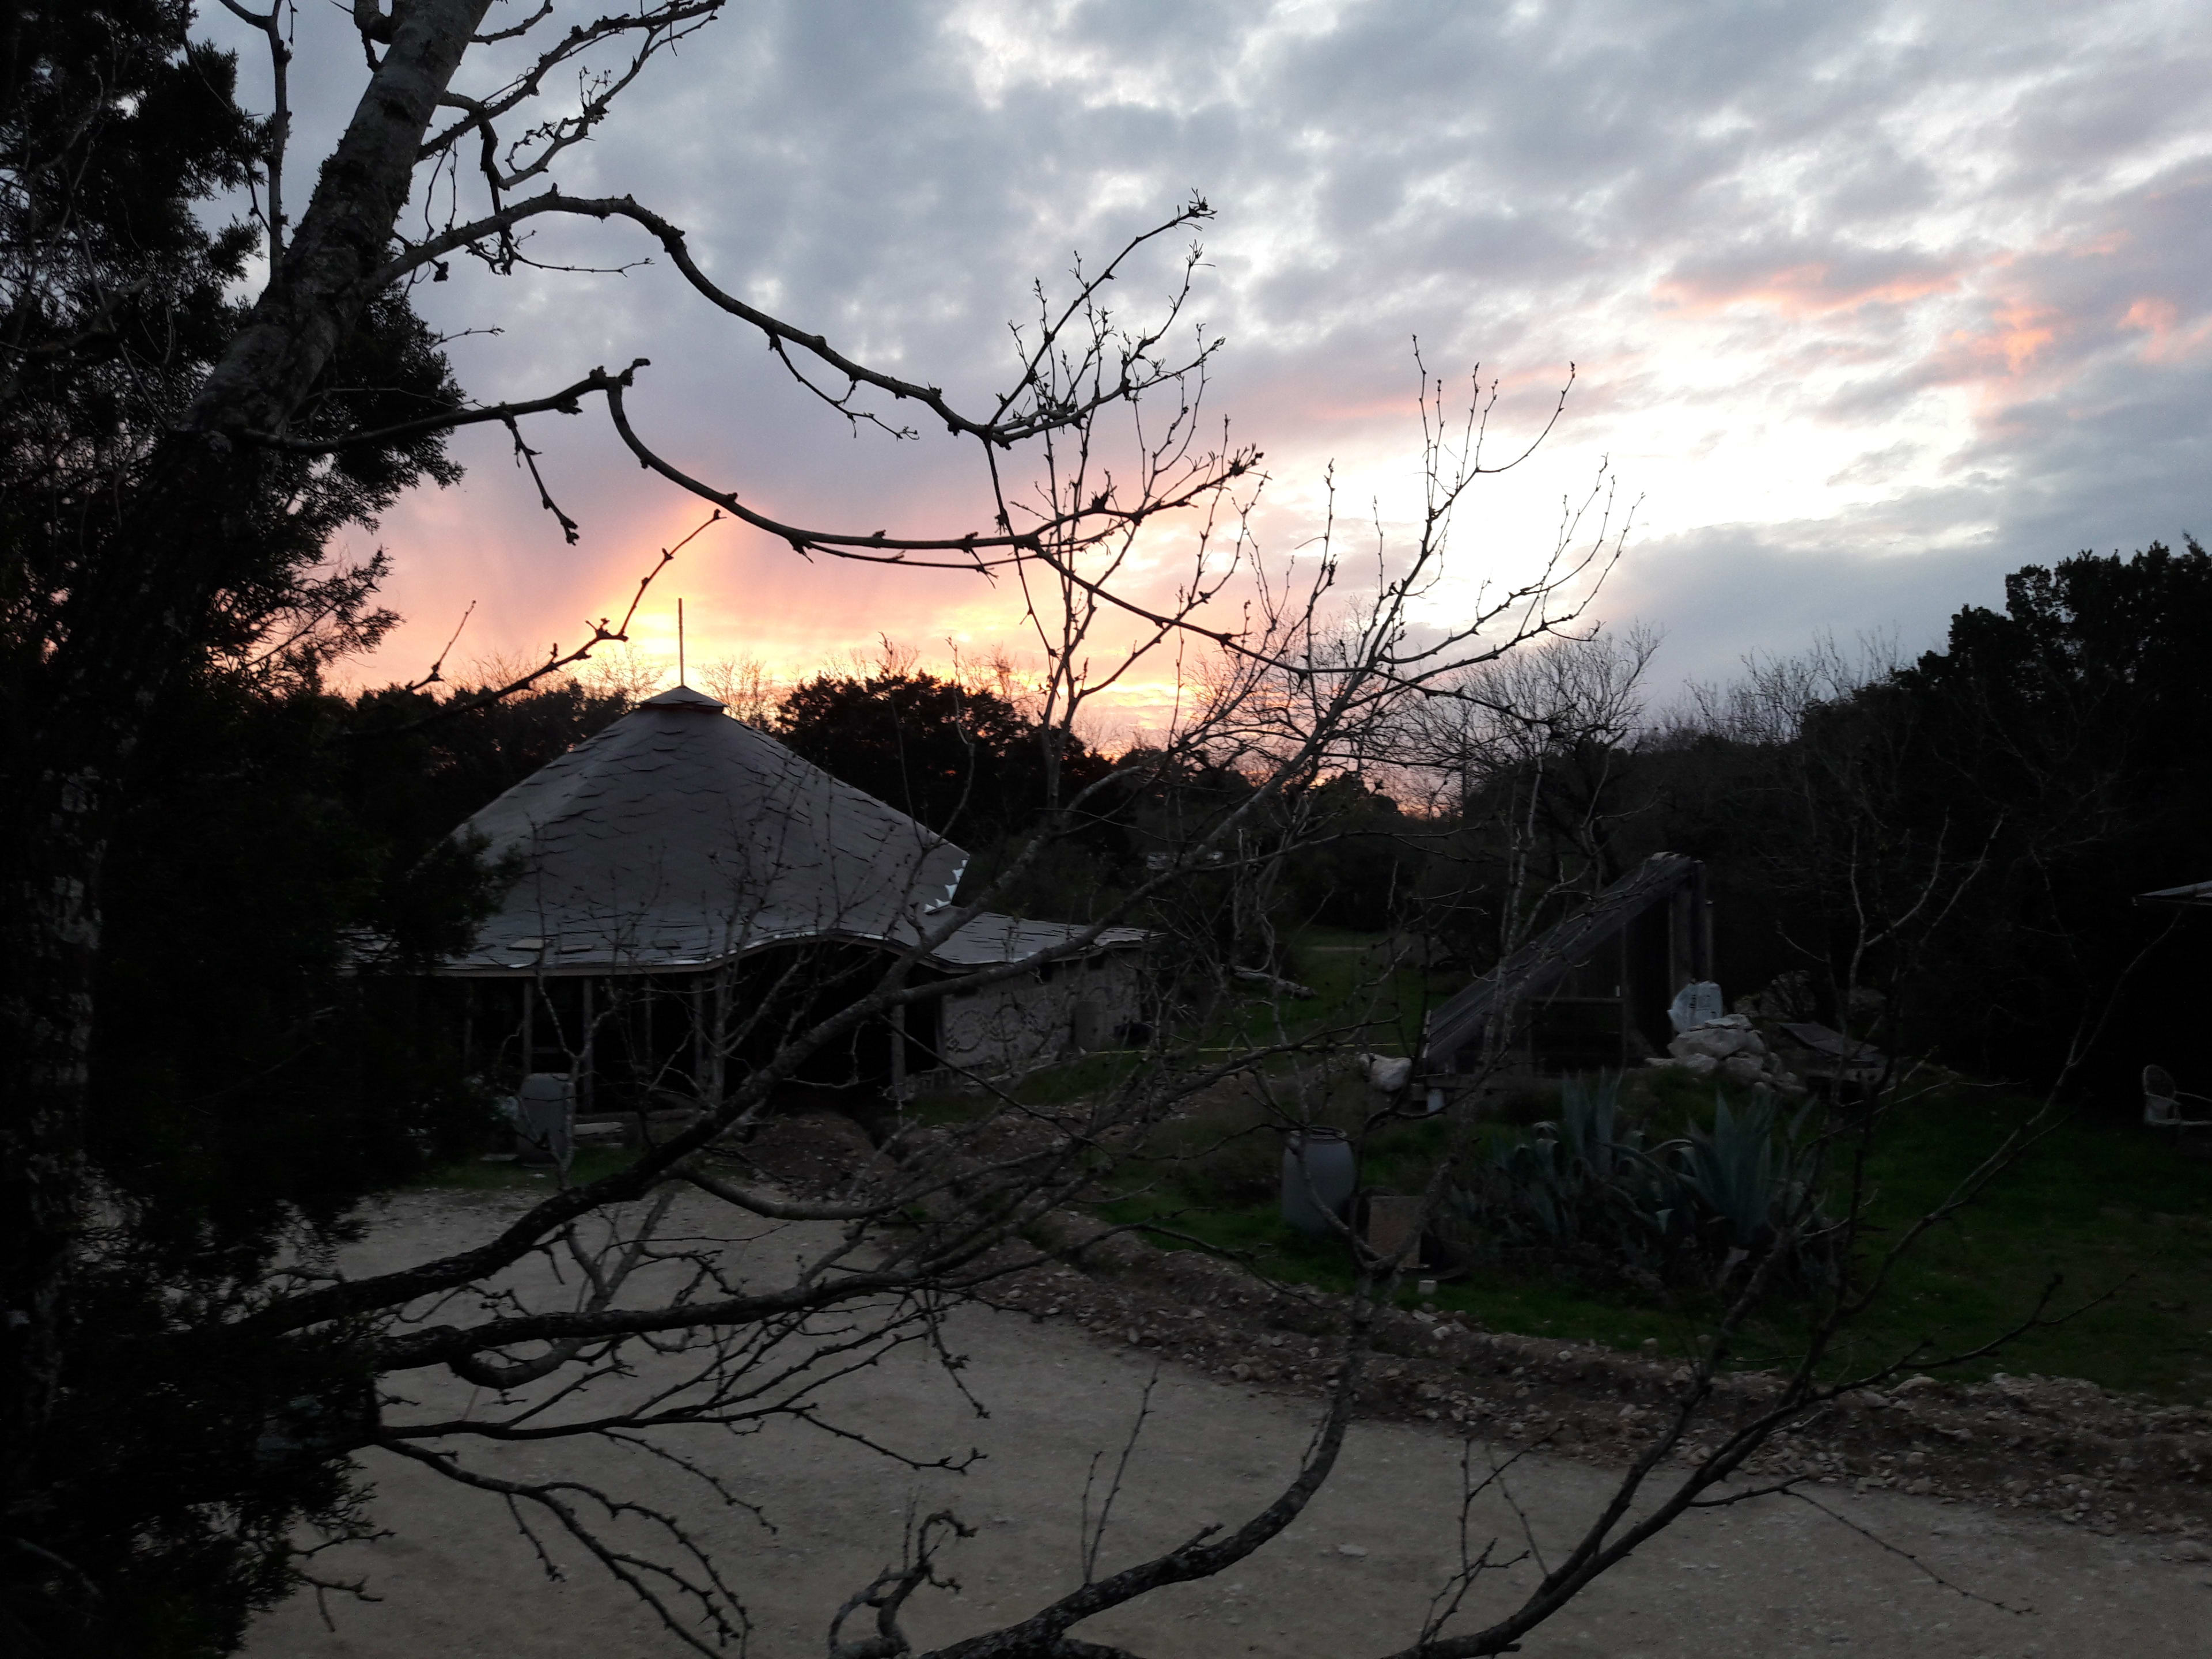 A sunset at the homestead.